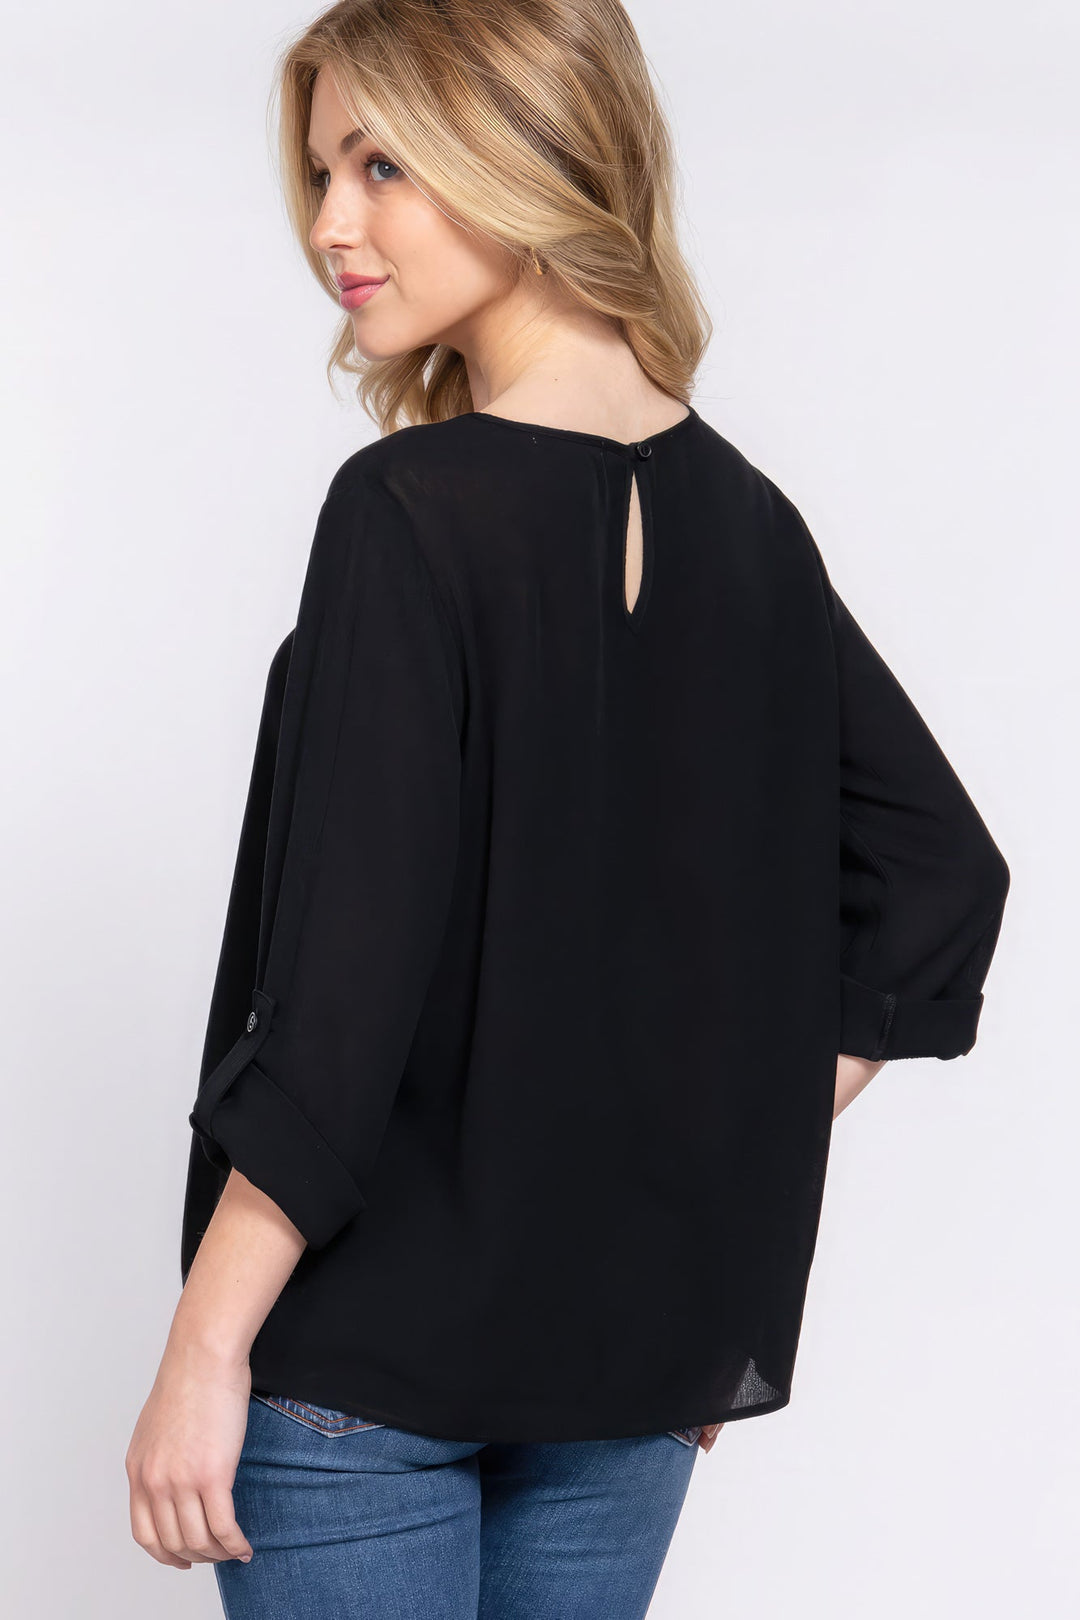 The802Gypsy  shirts and tops Black / S ❤GYPSY LOVE-Roll Up Slv Pleated Blouse